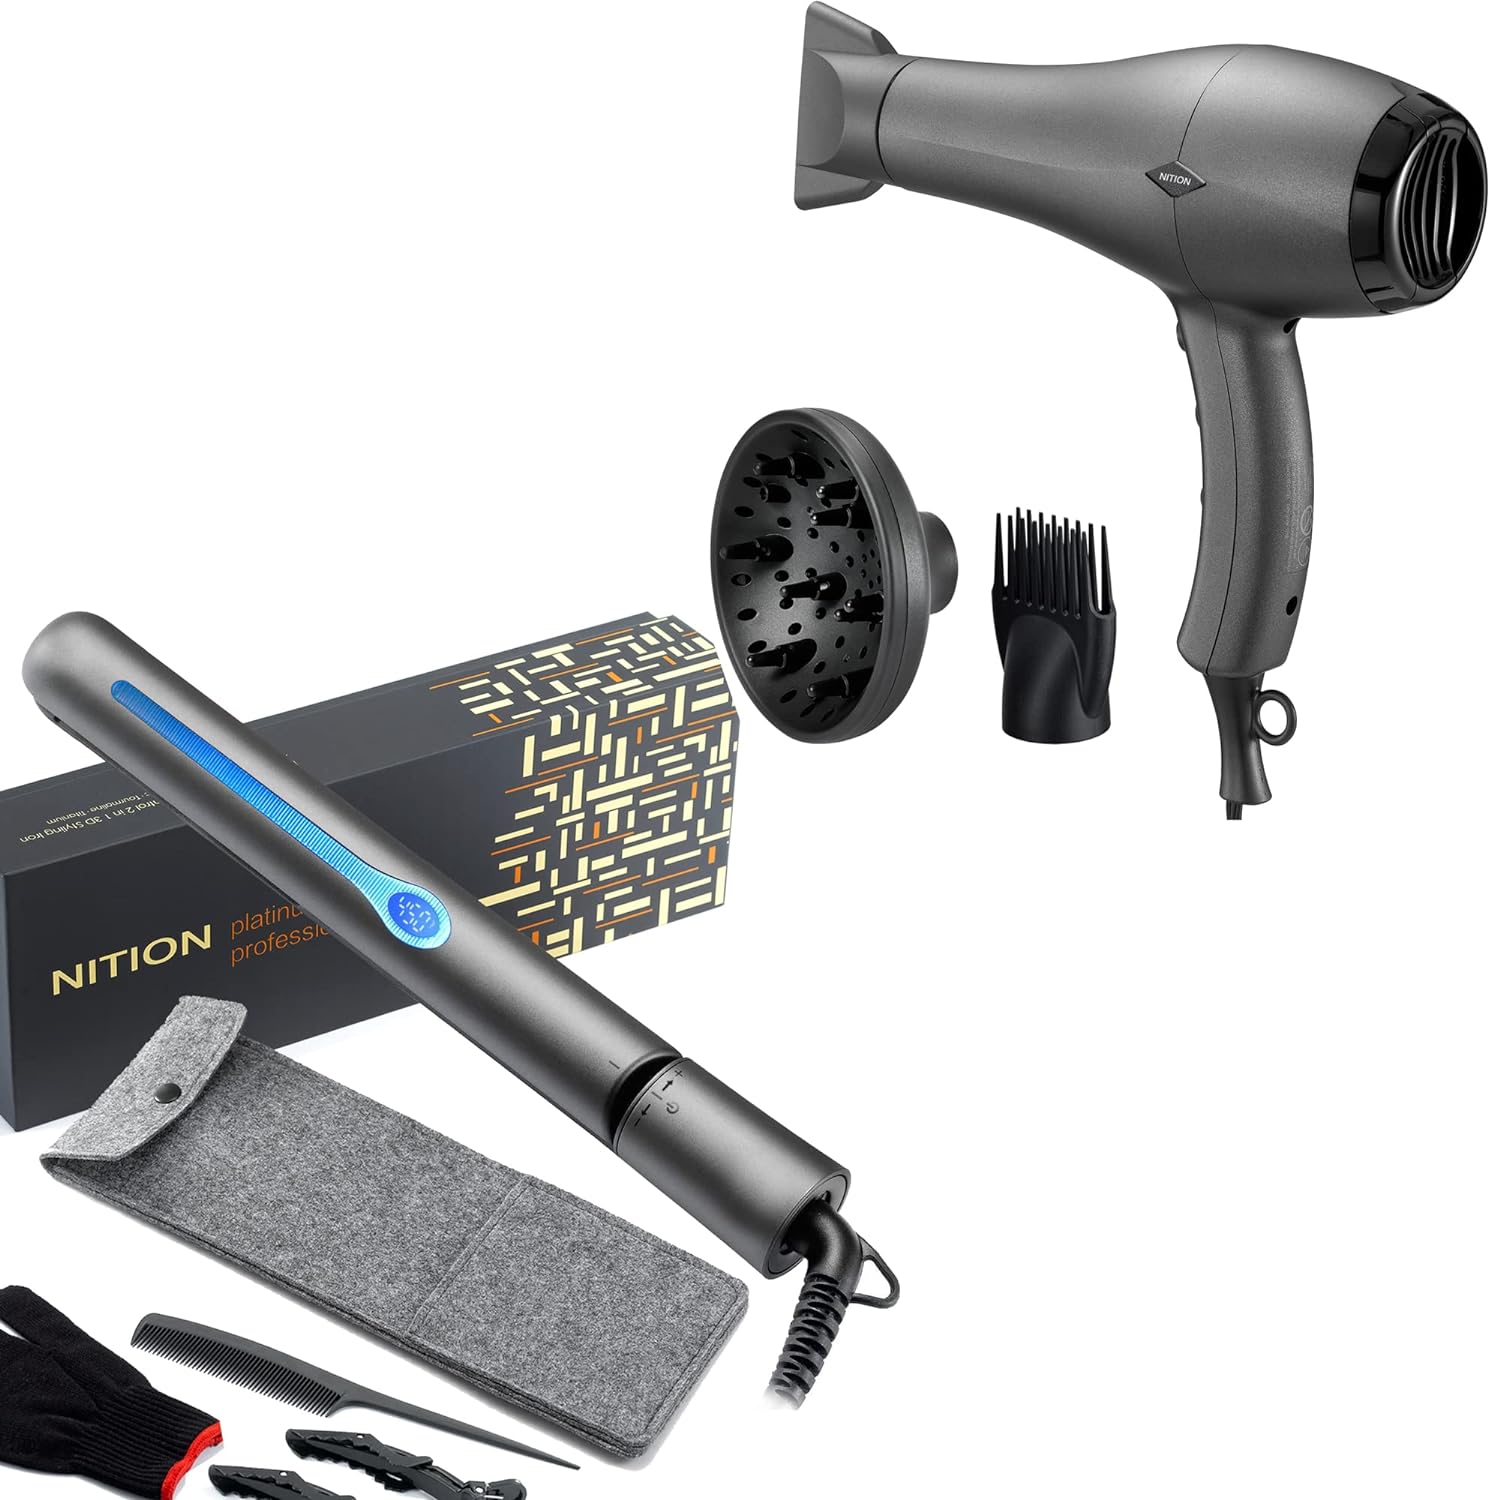 NITION Salon Hair Flat Iron and Hair Dryer with Diffuser/Comb Set